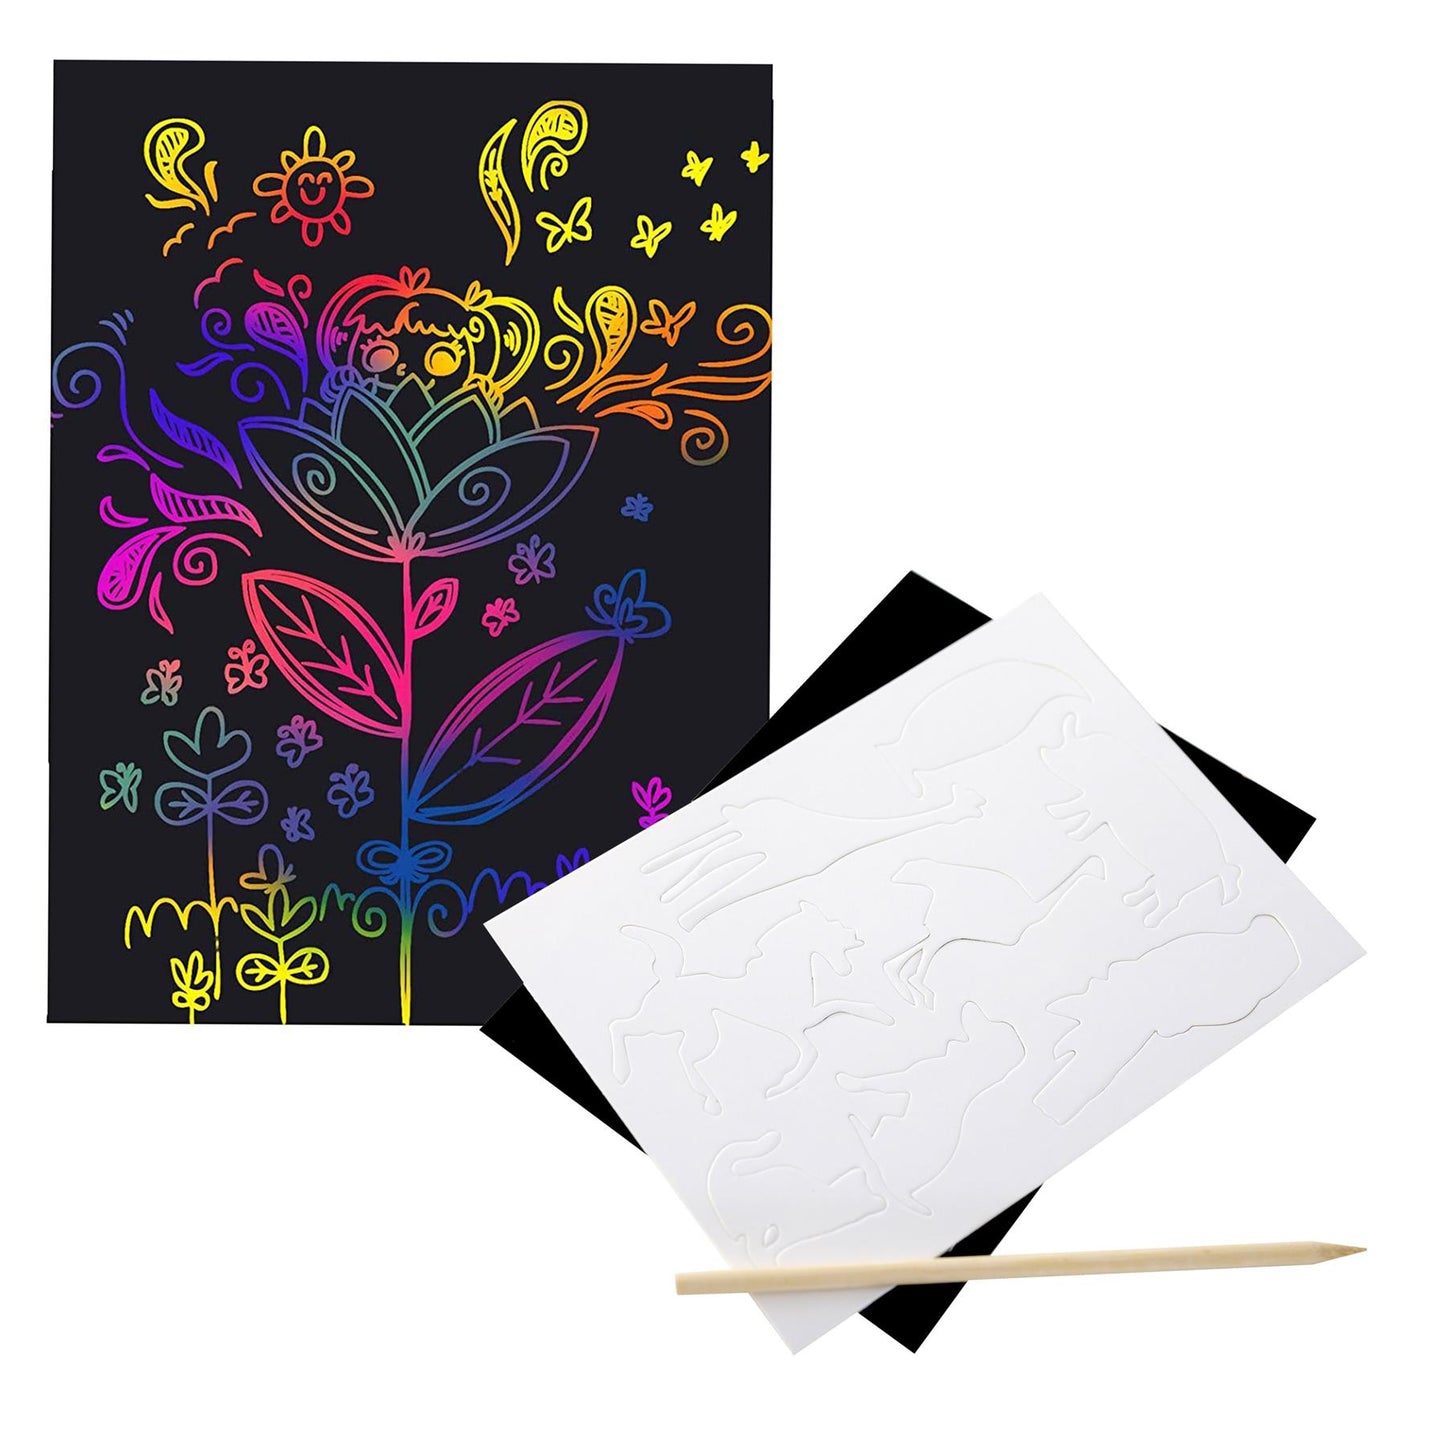 Magic Rainbow Scratch Paper Art Kit for Kids by The Magic Toy Shop - UKBuyZone